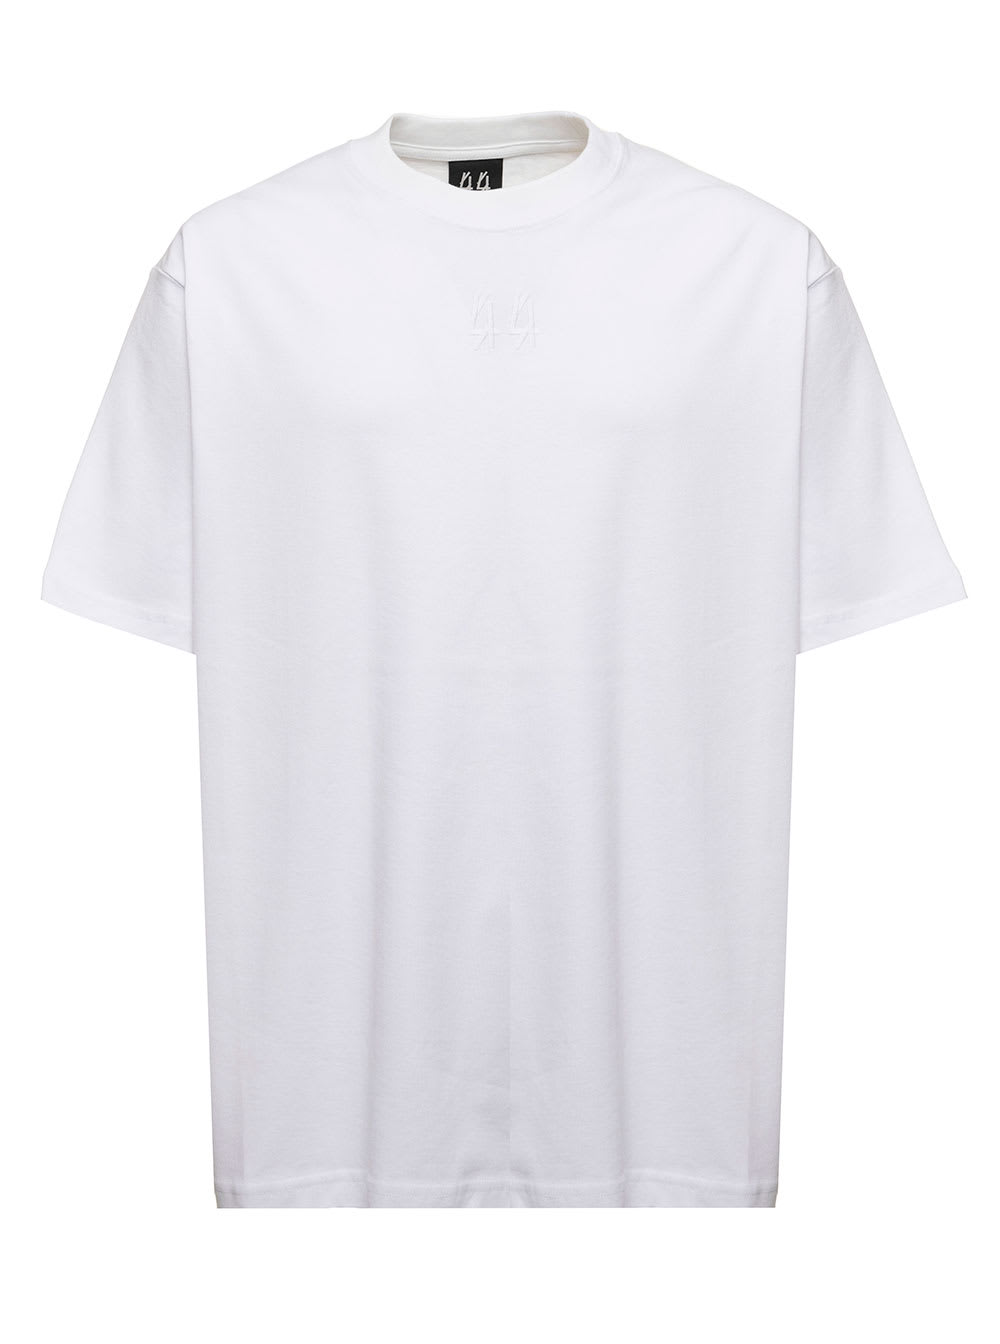 44 Label Group Mans White Cotton T-shirt With Embroidered Logo